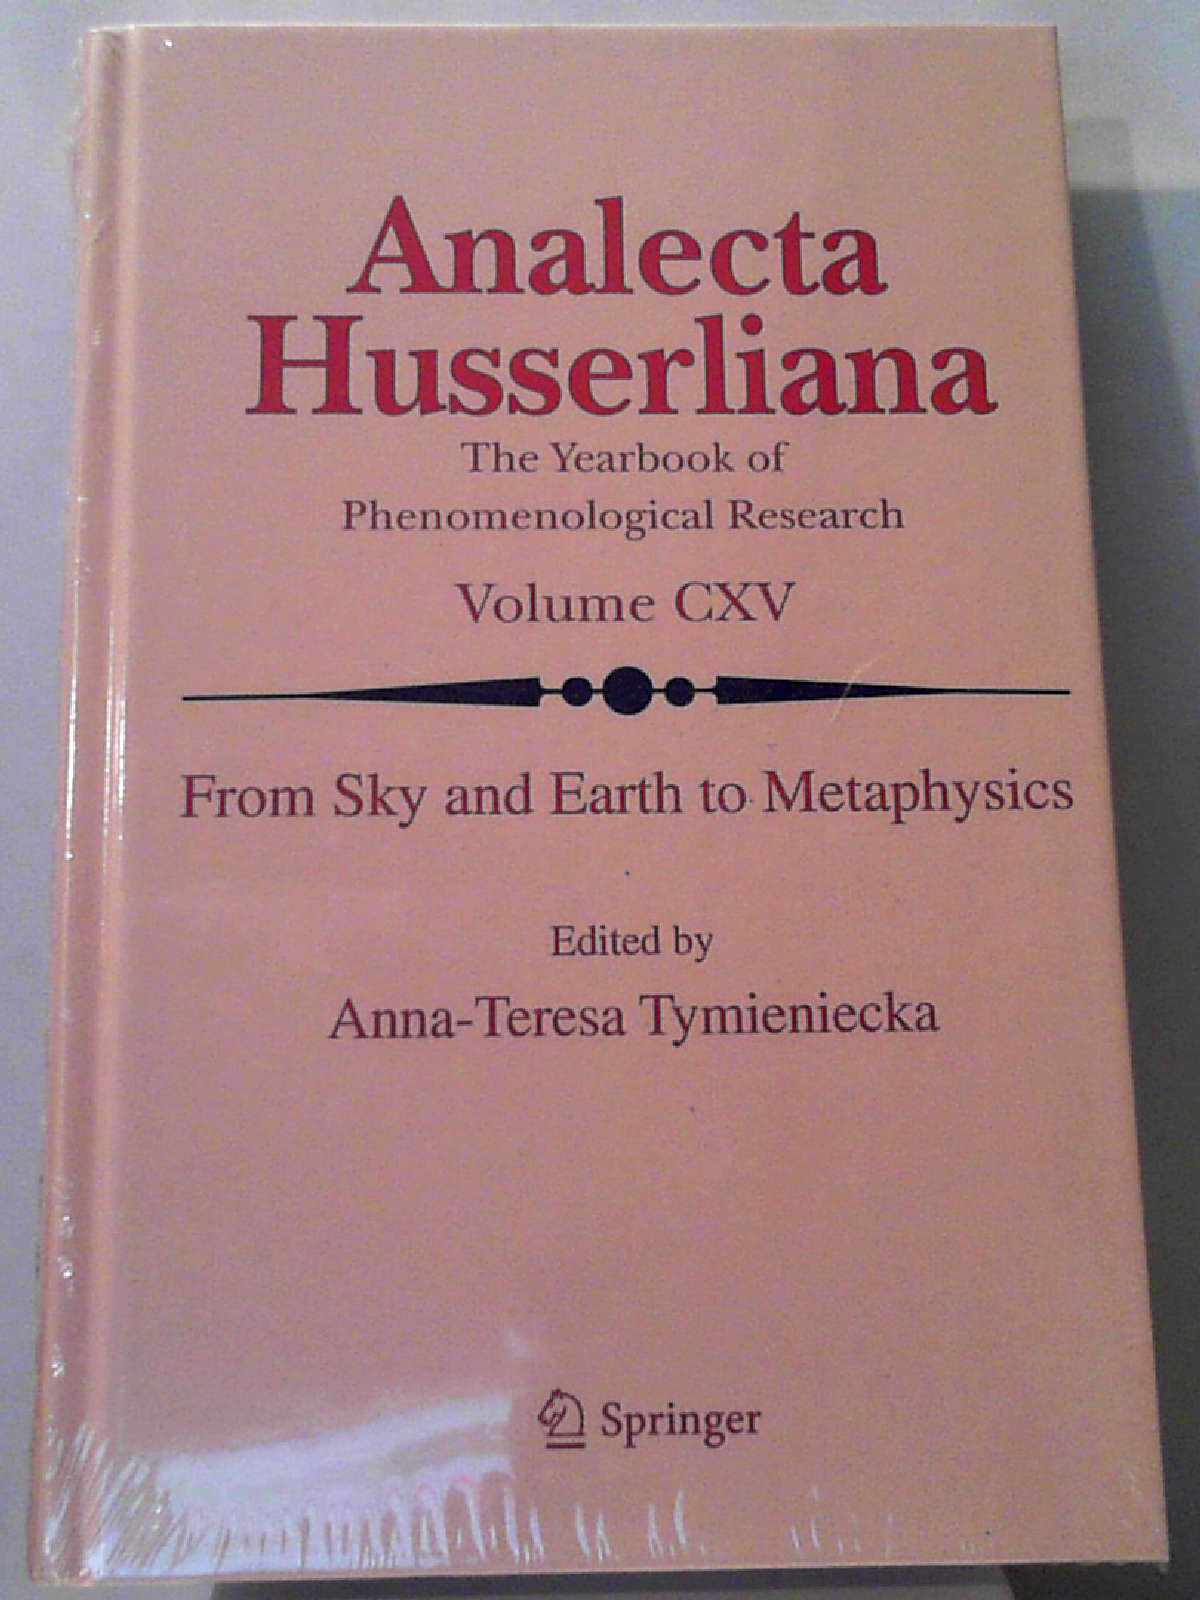 From Sky and Earth to Metaphysics (Analecta Husserliana, 115, Band 115) [Hardcover] Tymieniecka, Anna-Teresa